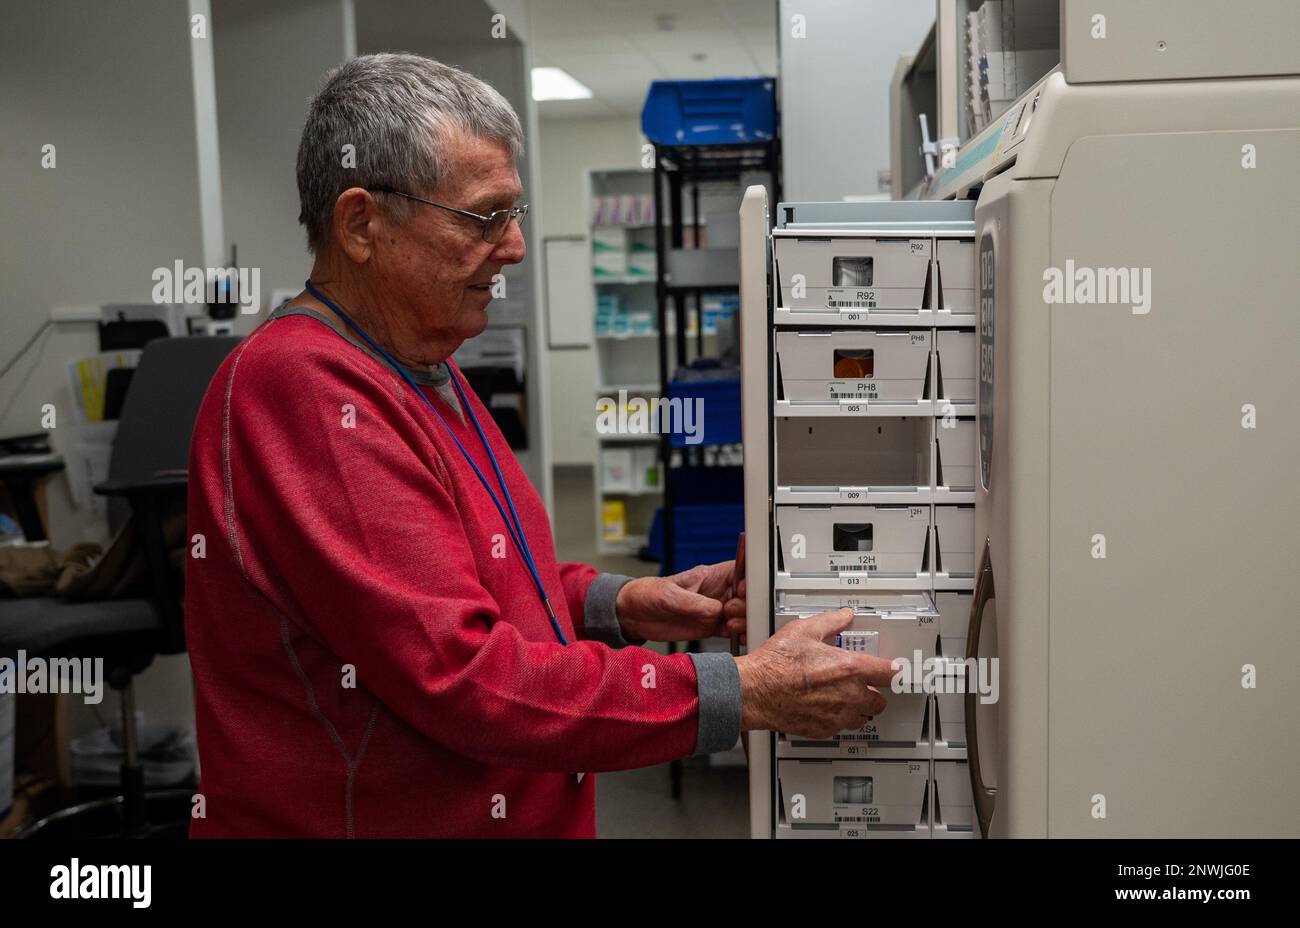 U.S. Air Force veteran Tom Siedel, 355th Medical Group Satellite Pharmacy volunteer, restocks pharmaceutical drugs at Davis-Monthan Air Force Base, Ariz., Jan. 17, 2023. Tom aids the 355th MDG mission by dedicating anywhere from 4-20 hours every week out of his own time to give back to the community. Stock Photo